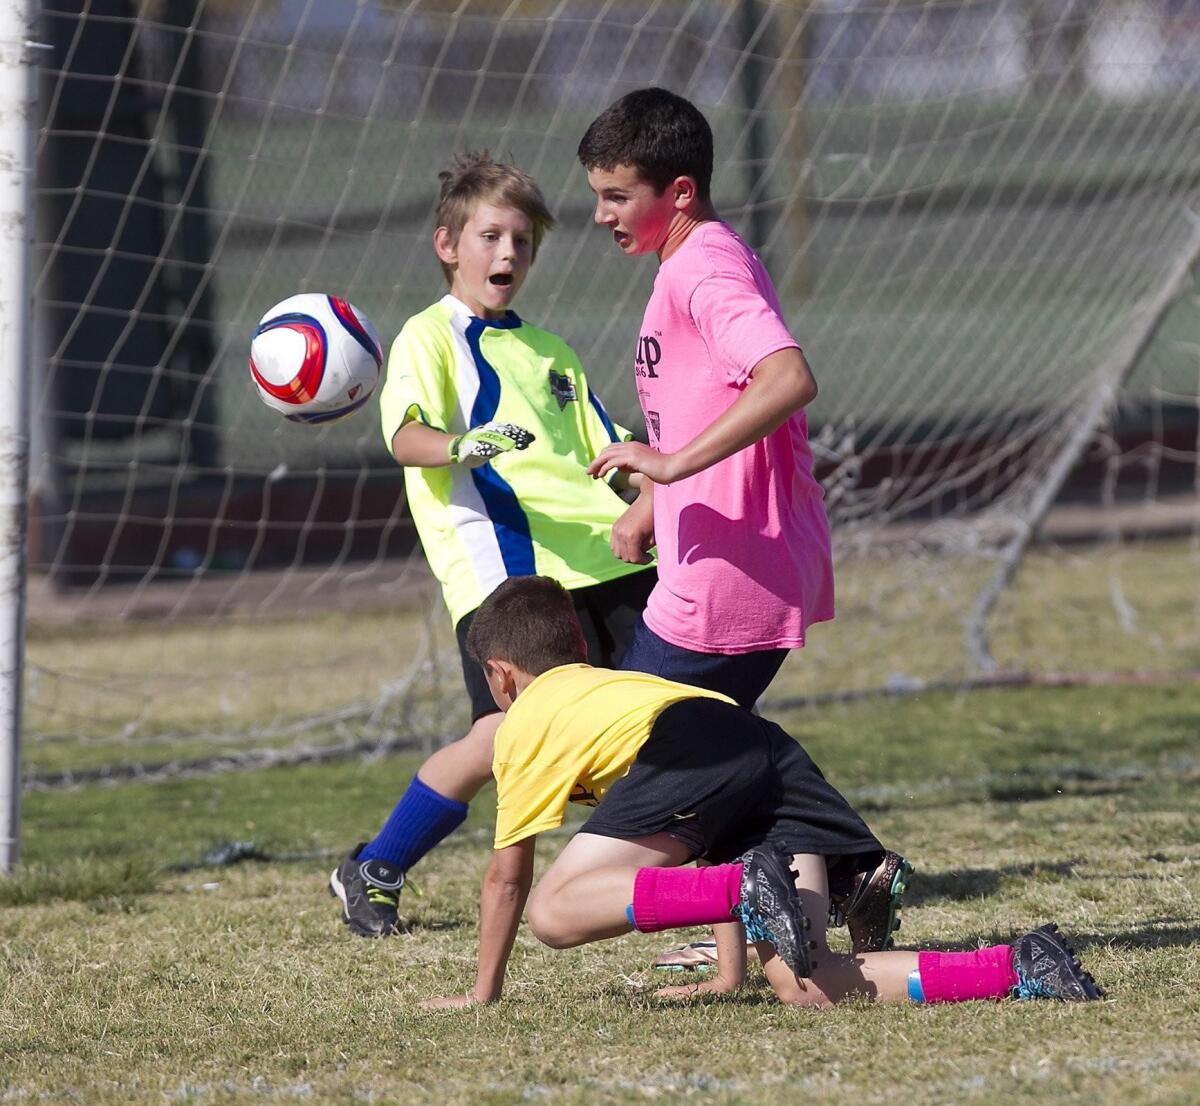 Carden Hall goalie Garrett Richards jumps in to stop a point-blank shot by St. Joachim's Ben Chiano, in pink, in a boys' 5-6 Silver Division game of the Pilot Cup on Thursday.